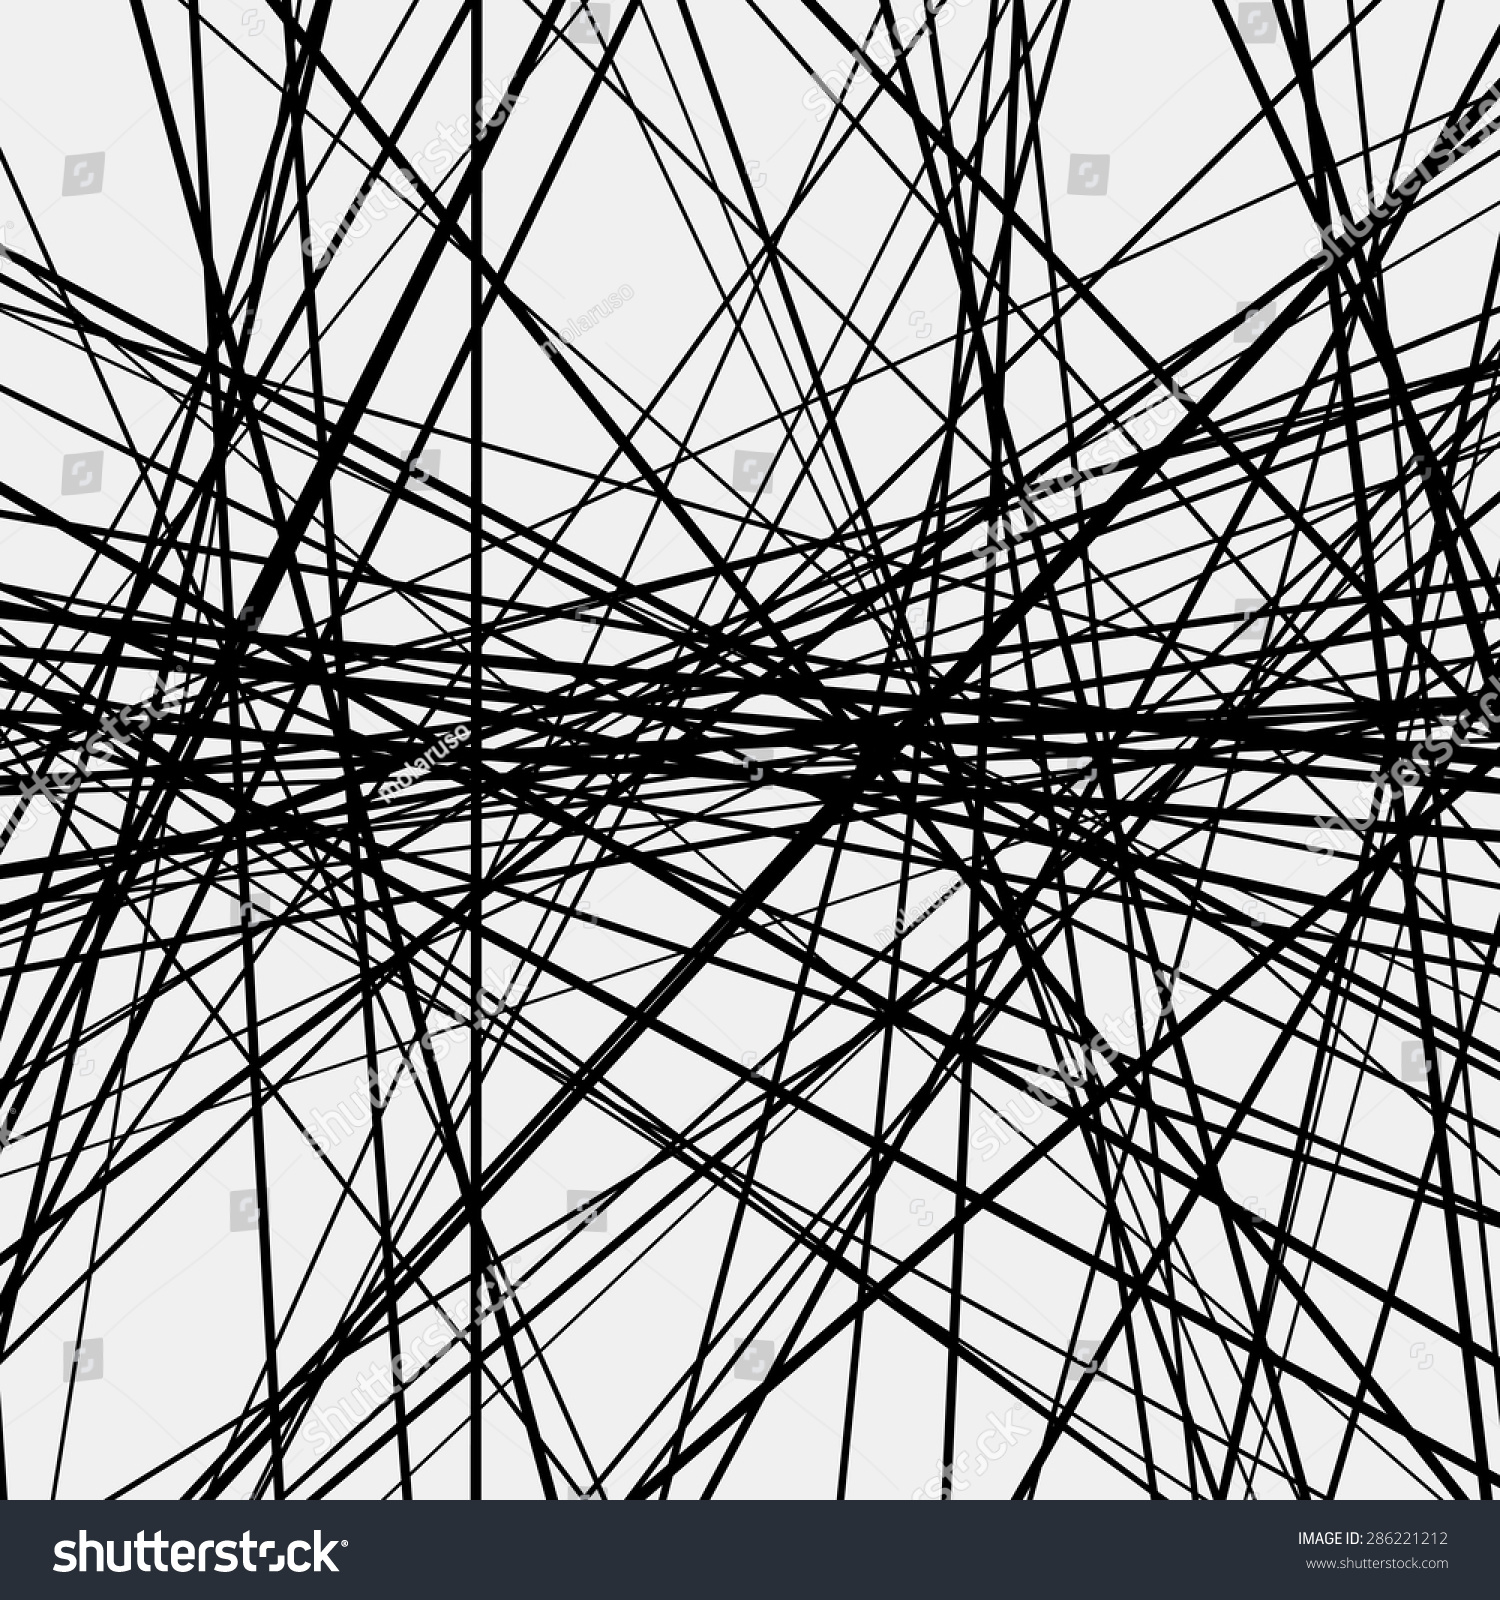 Light Abstract Background With Random Black Lines For Web ...